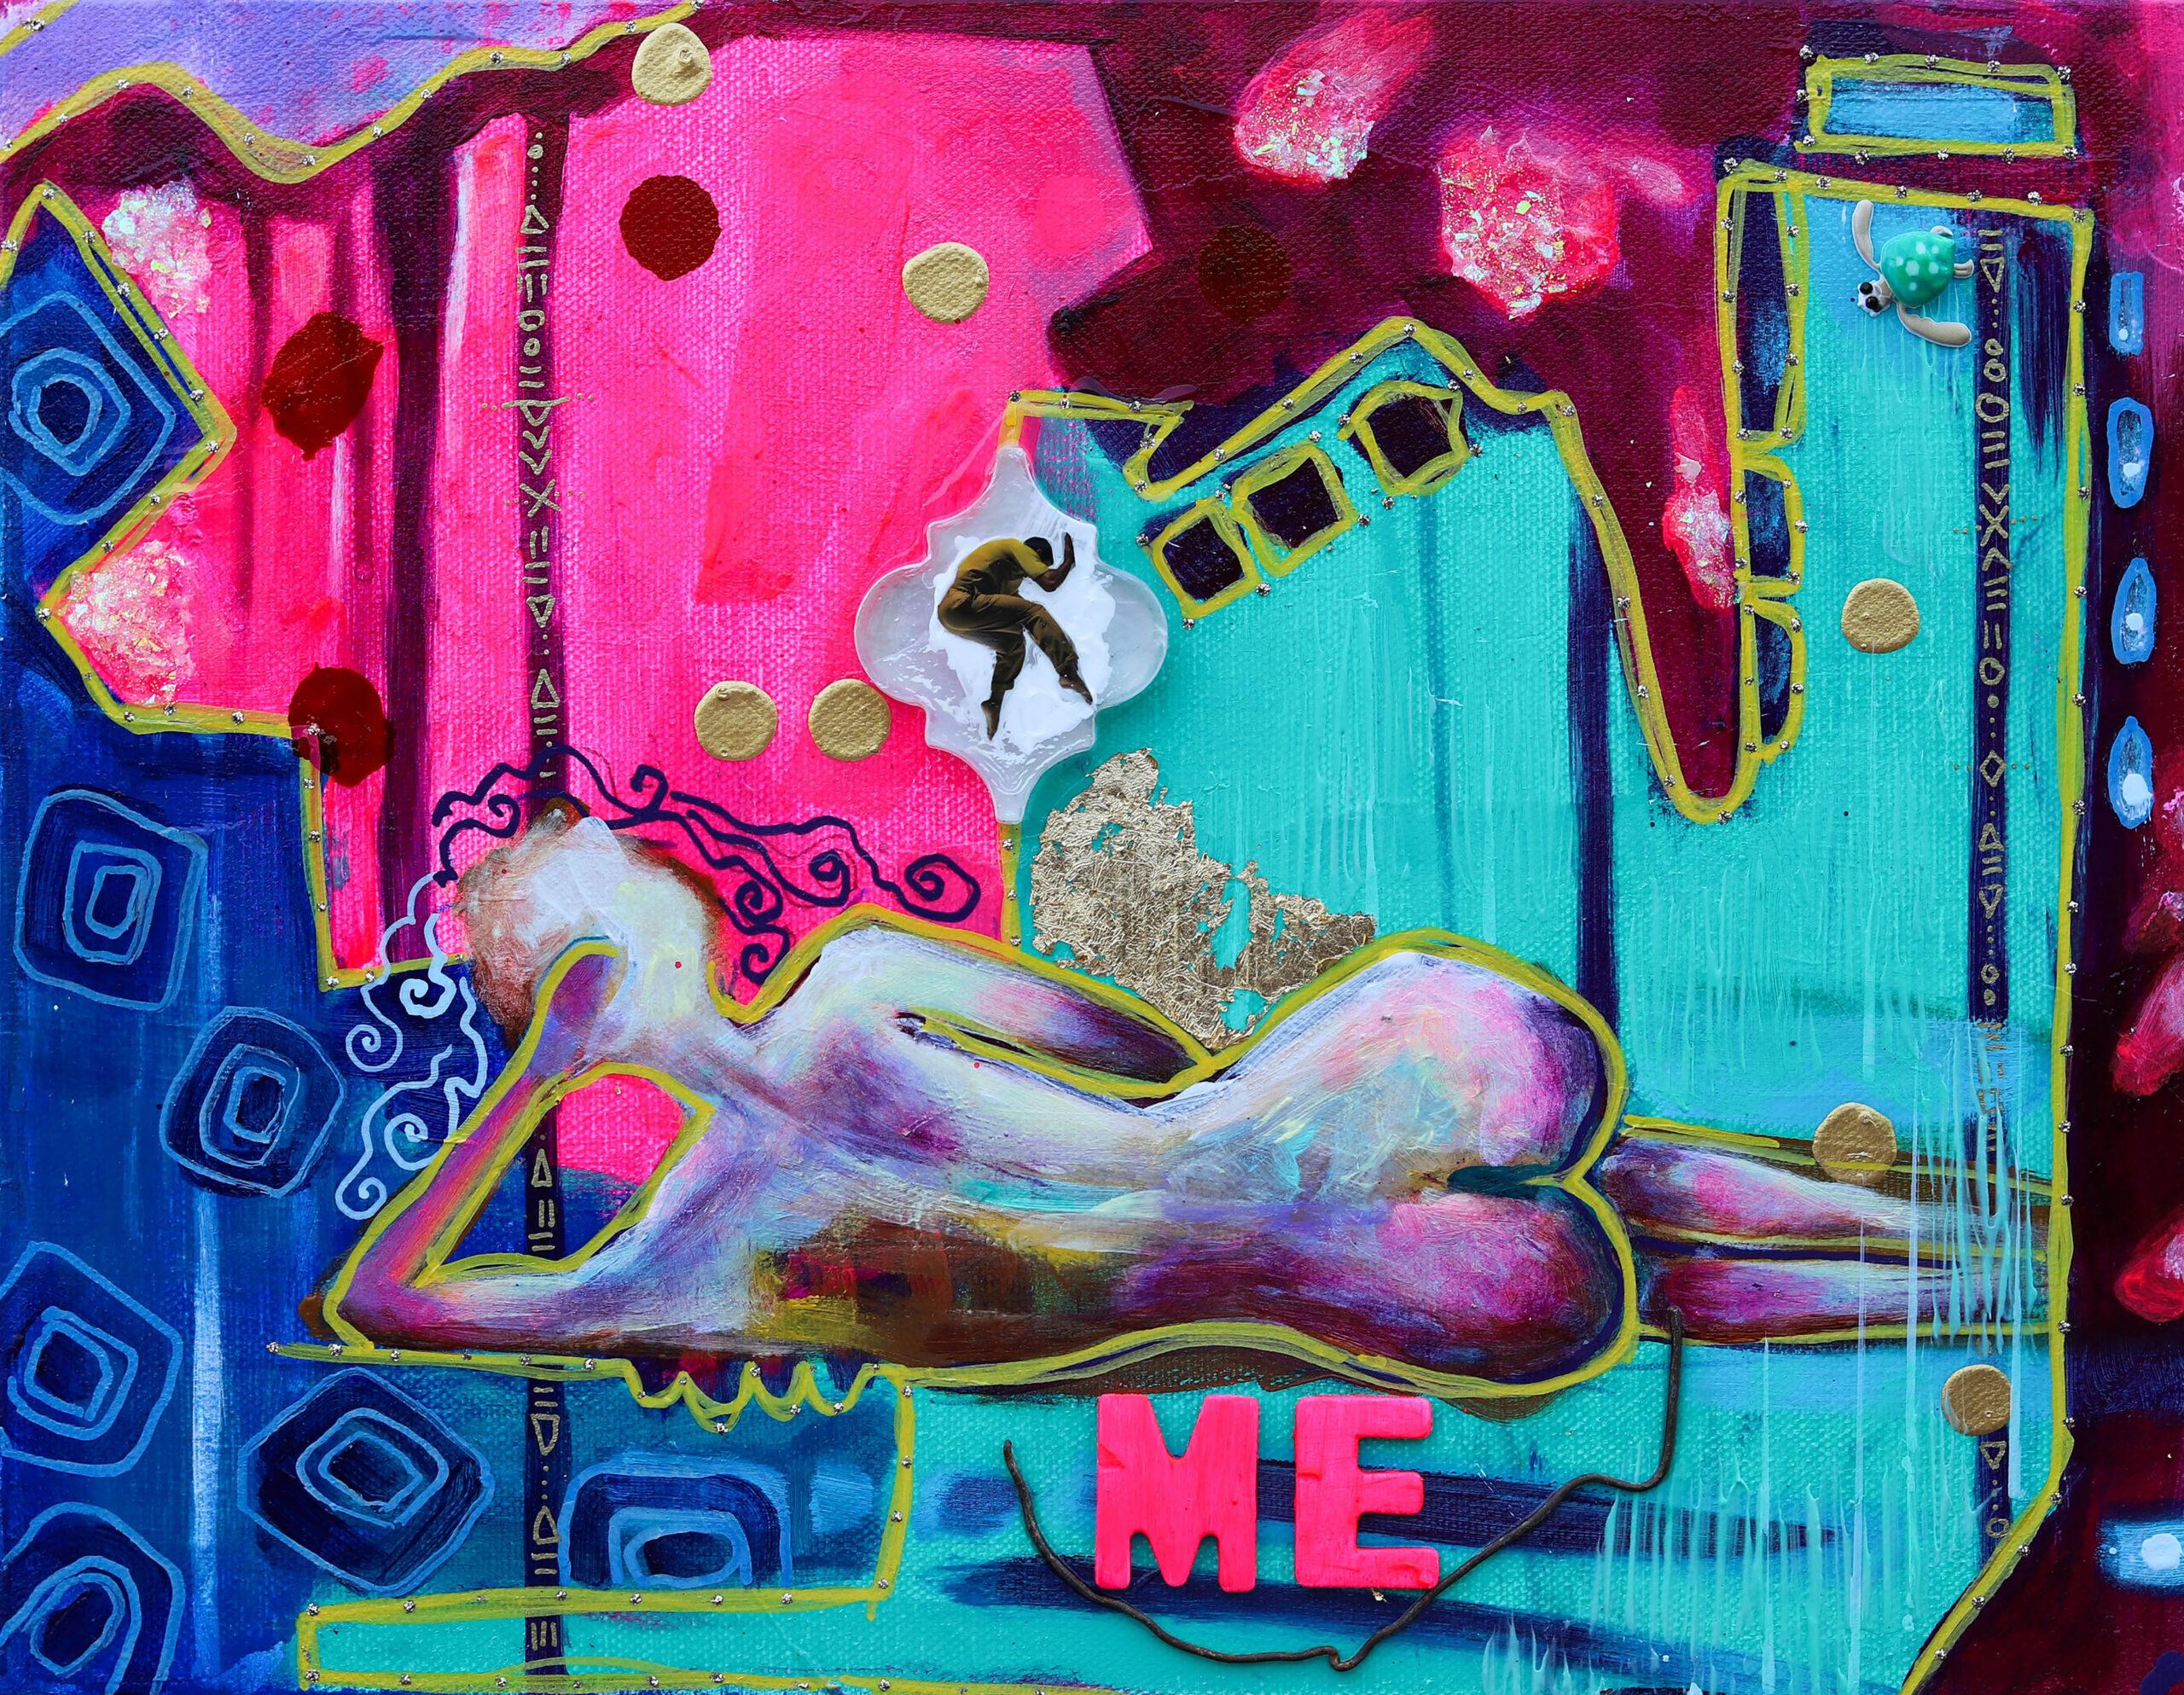 SHE + ME = COMPLEX by Nicole Collie - Painting by Unknown